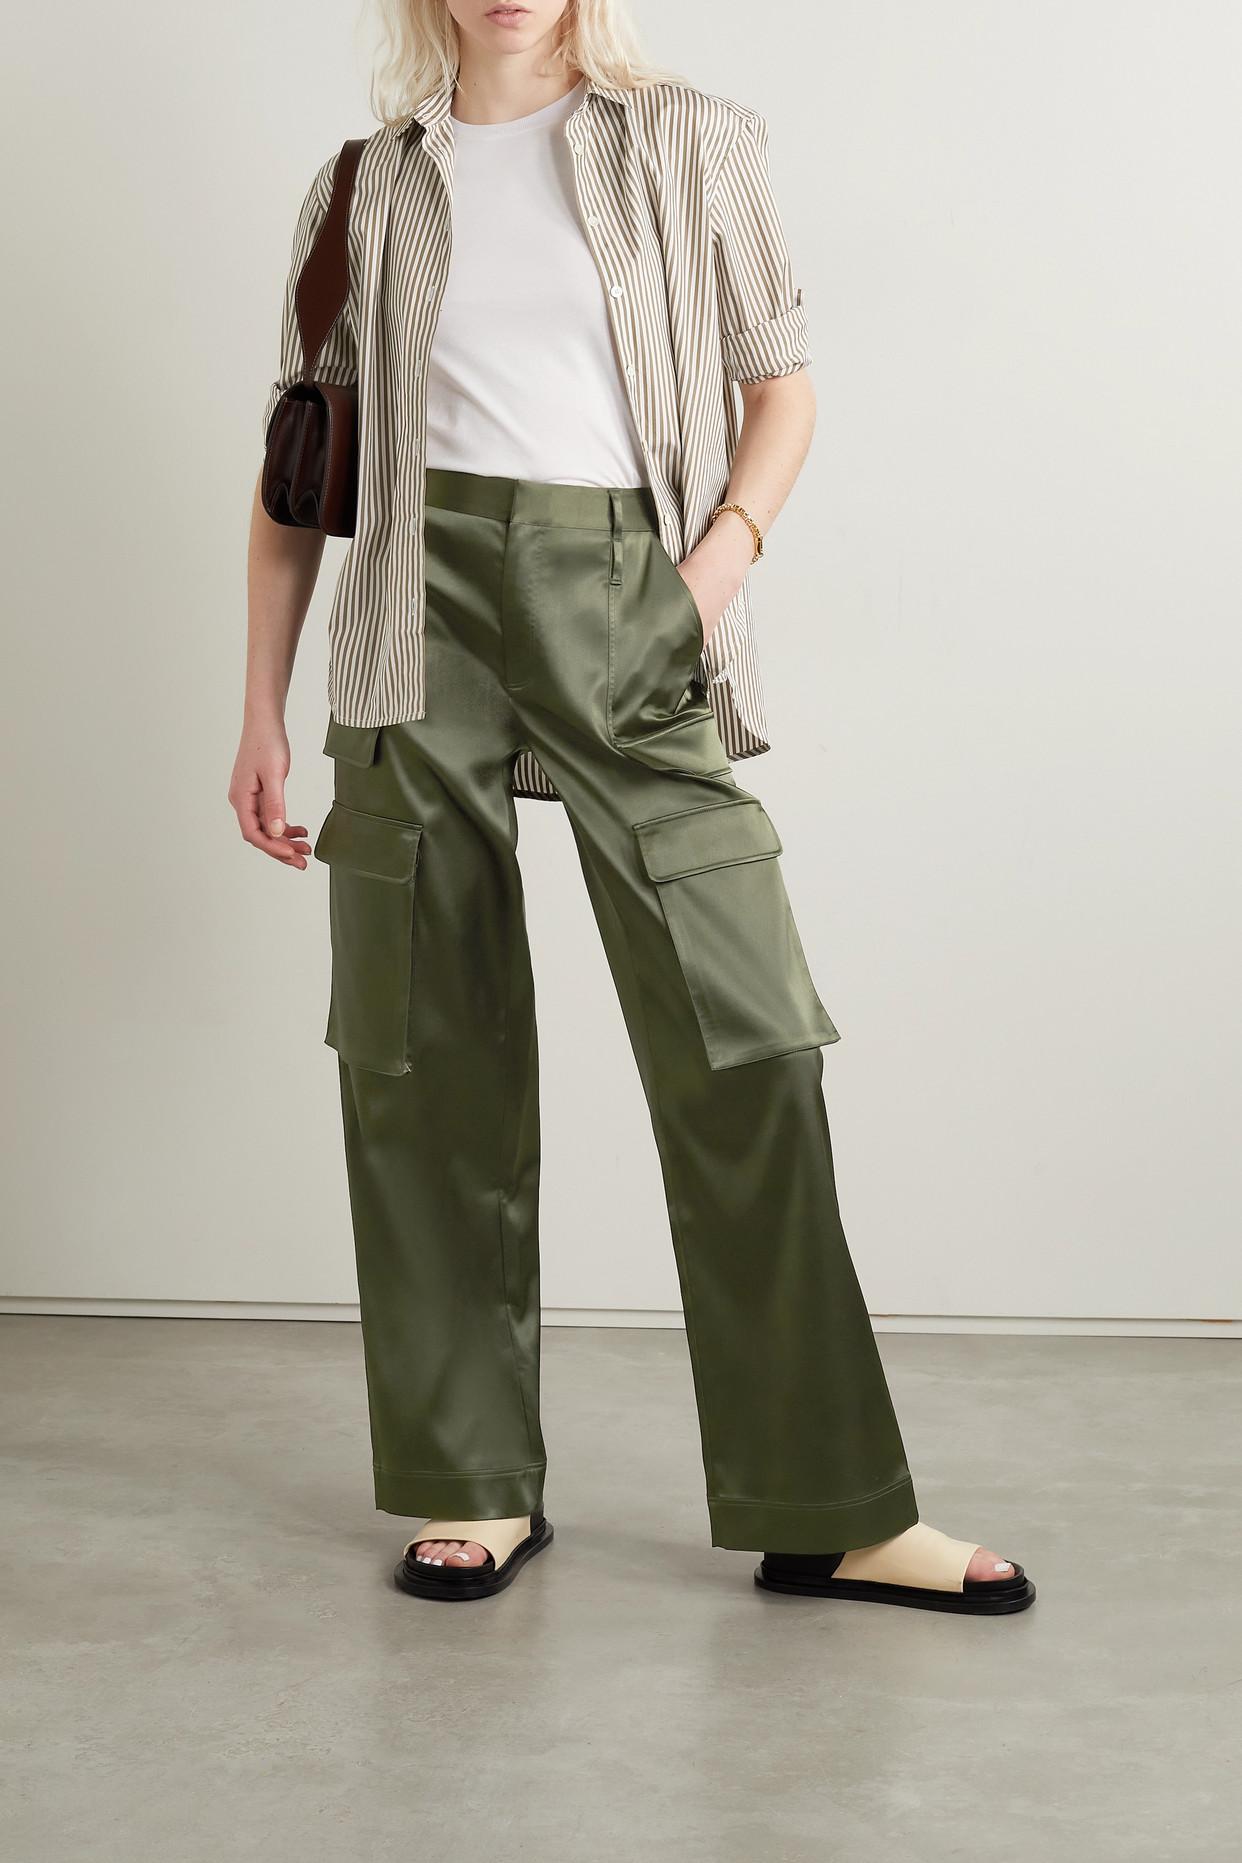 Buy Green Embroidered Straight Pants Online - W for Woman